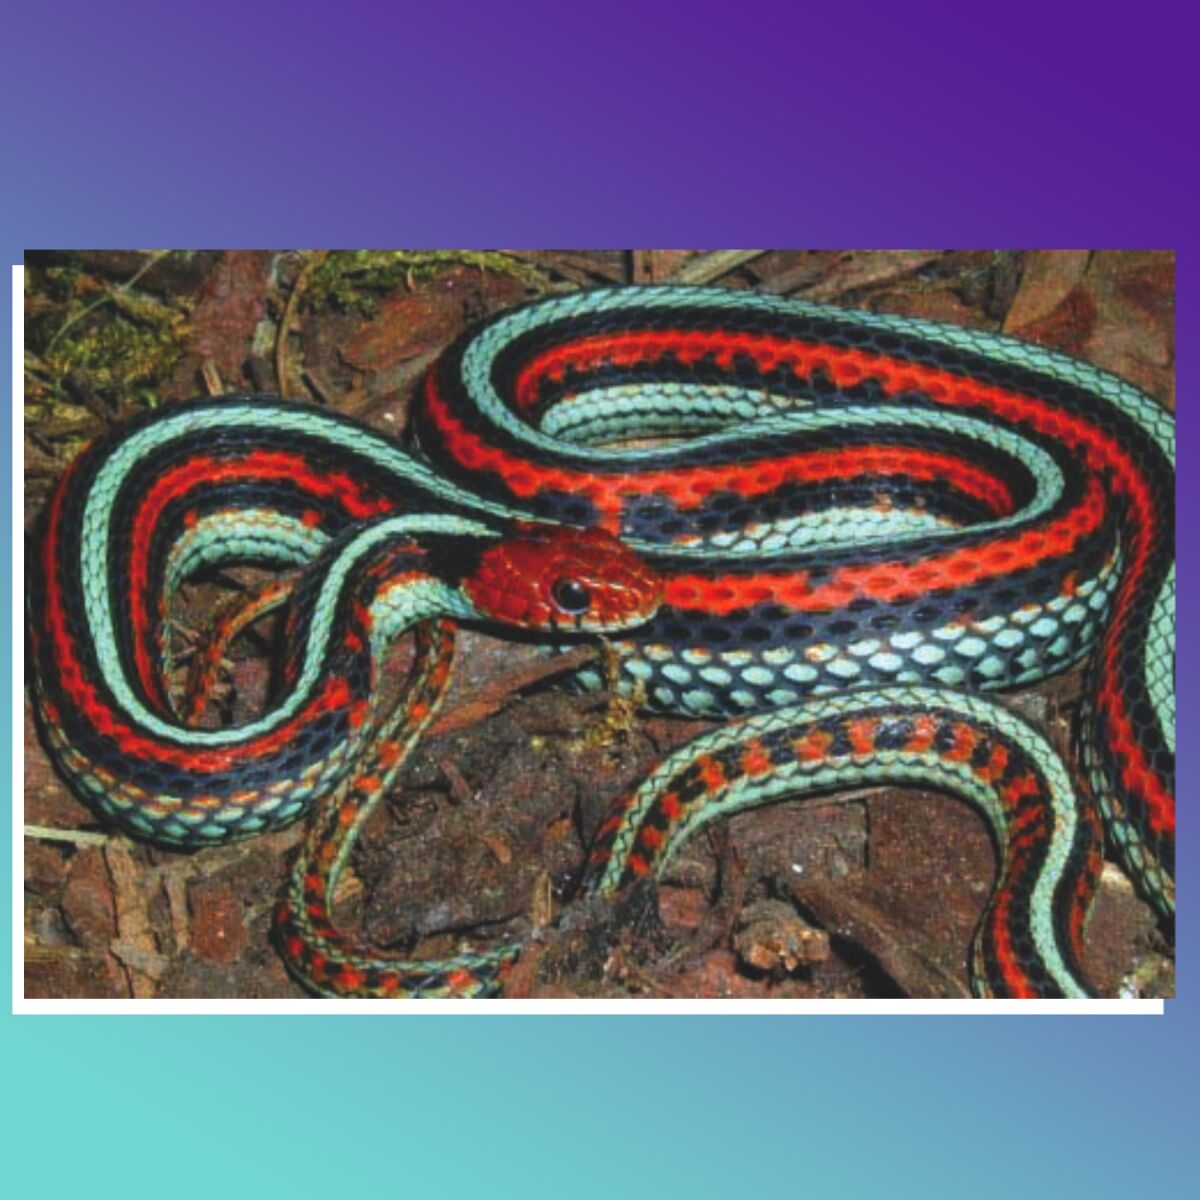 A coiled snake with red, black and aqua bands and a red head